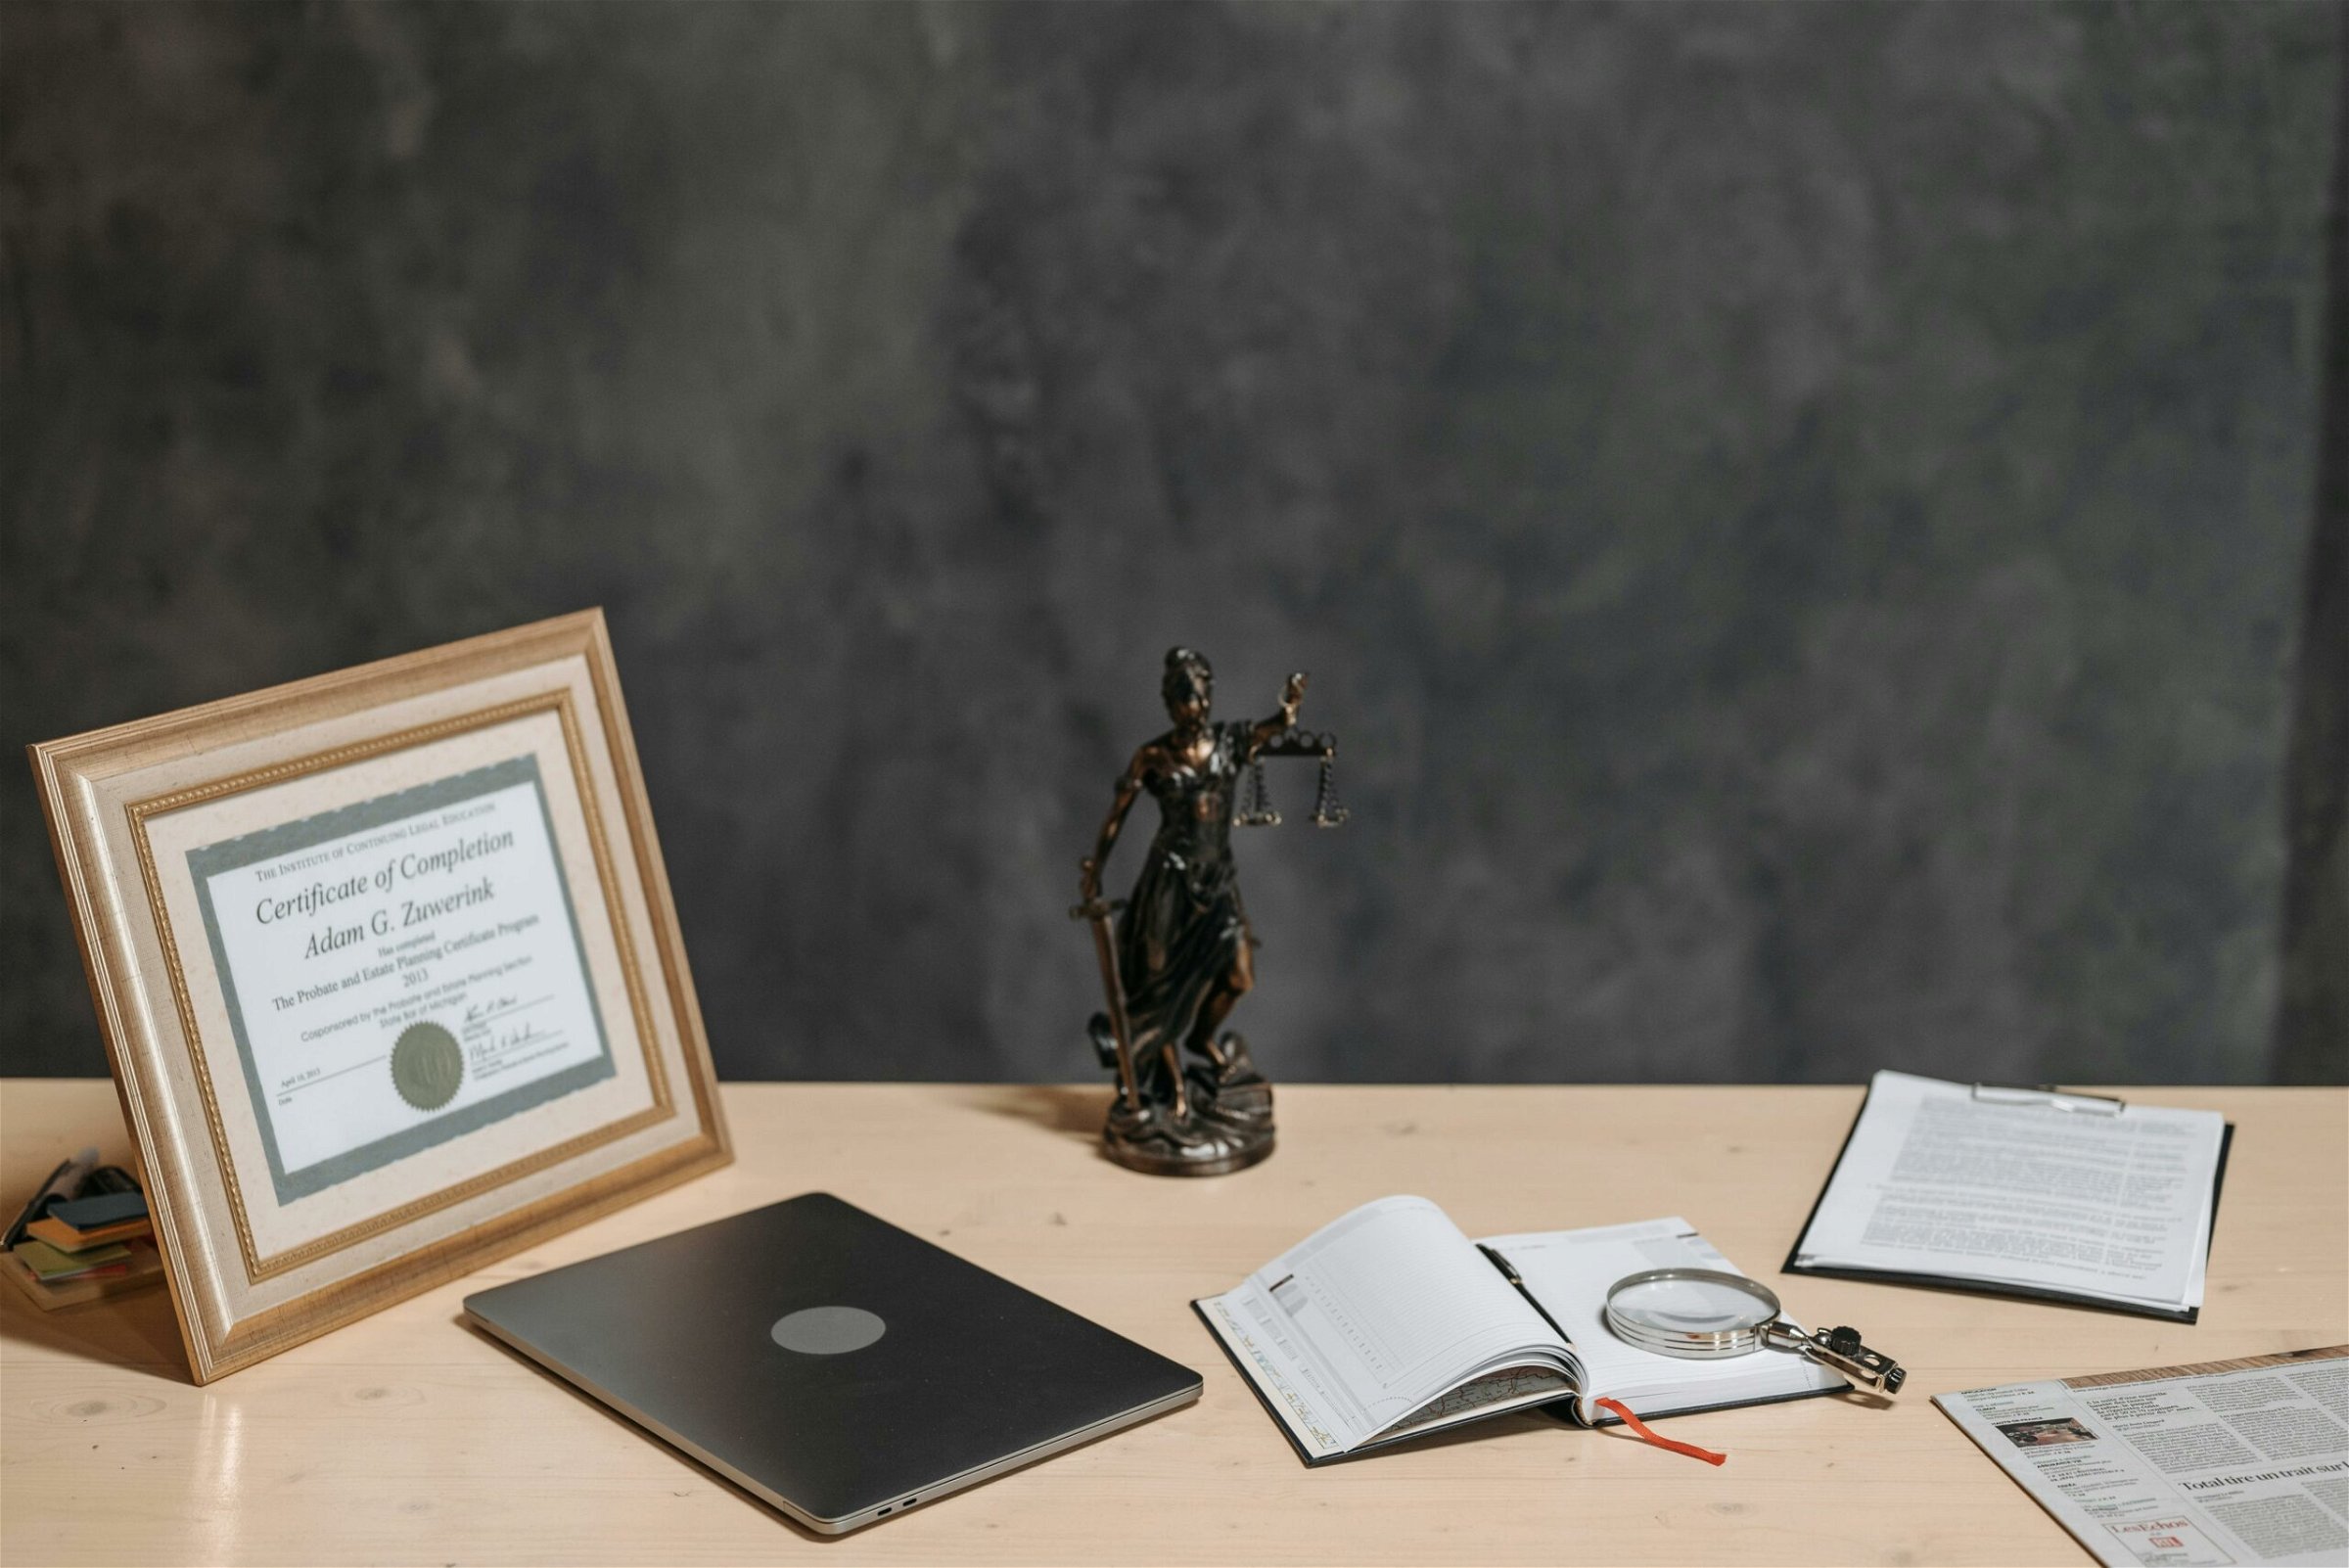 Image of a certification in a picture frame with statue, laptop, book and newspaper on the table - Destination Certification